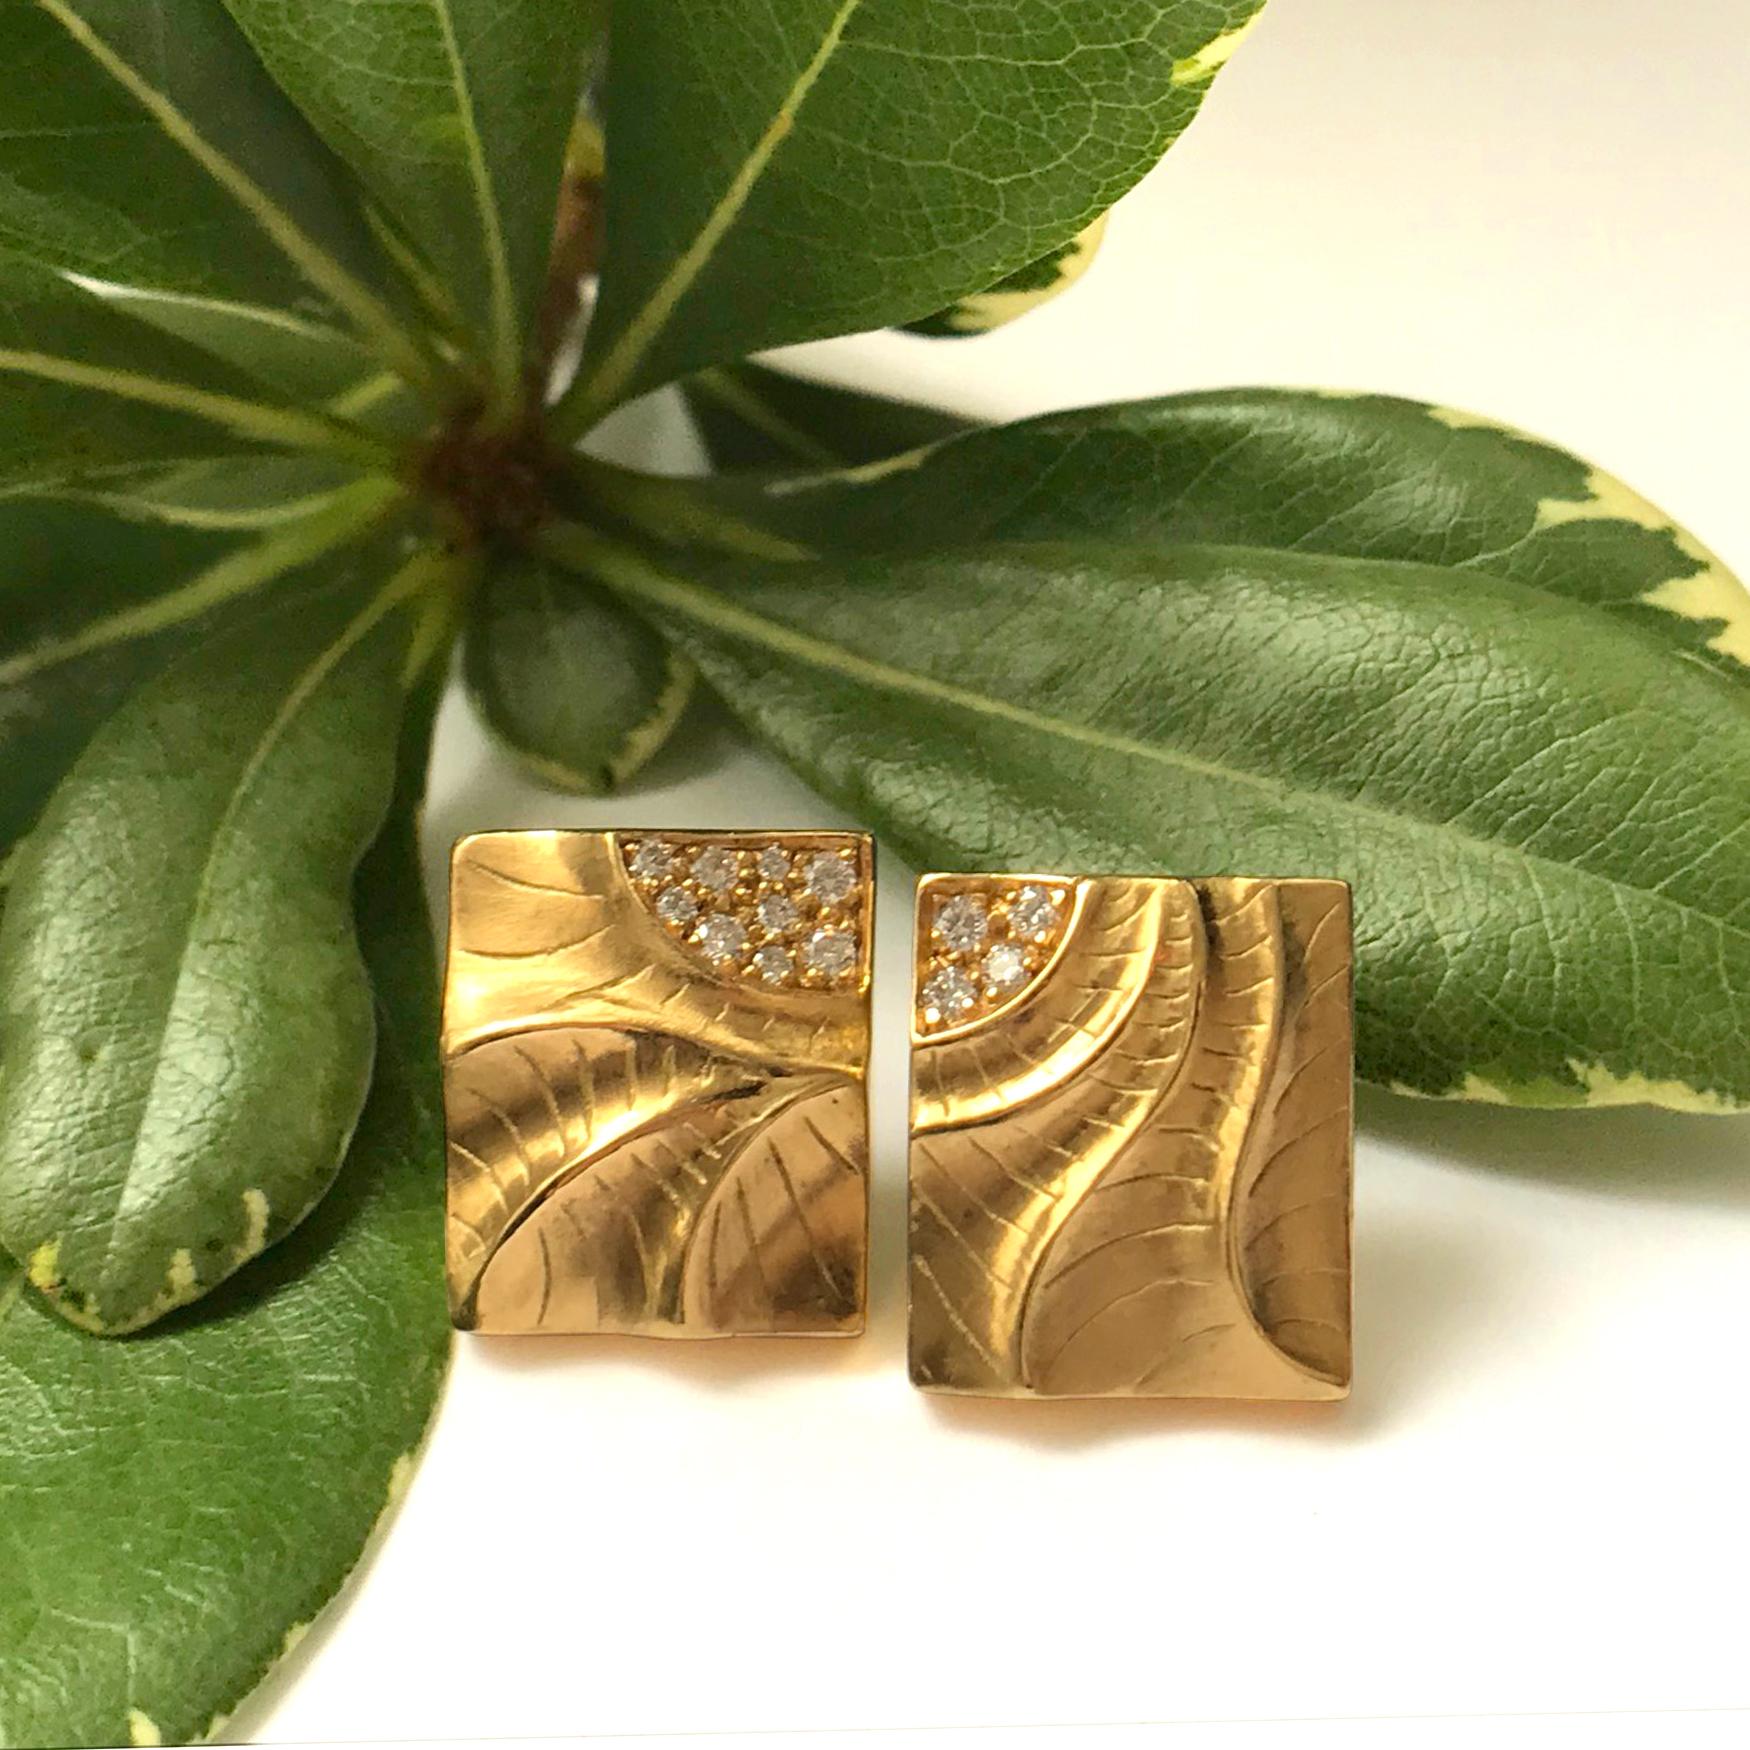 K.Mita's hand carved Rectangular Puzzle Earrings -- a different take on her Square Puzzle Earrings -- are an excellent example of her Sand Dune Collection. Endless waves of sand continue from one earring to the next and together form a puzzle. Each